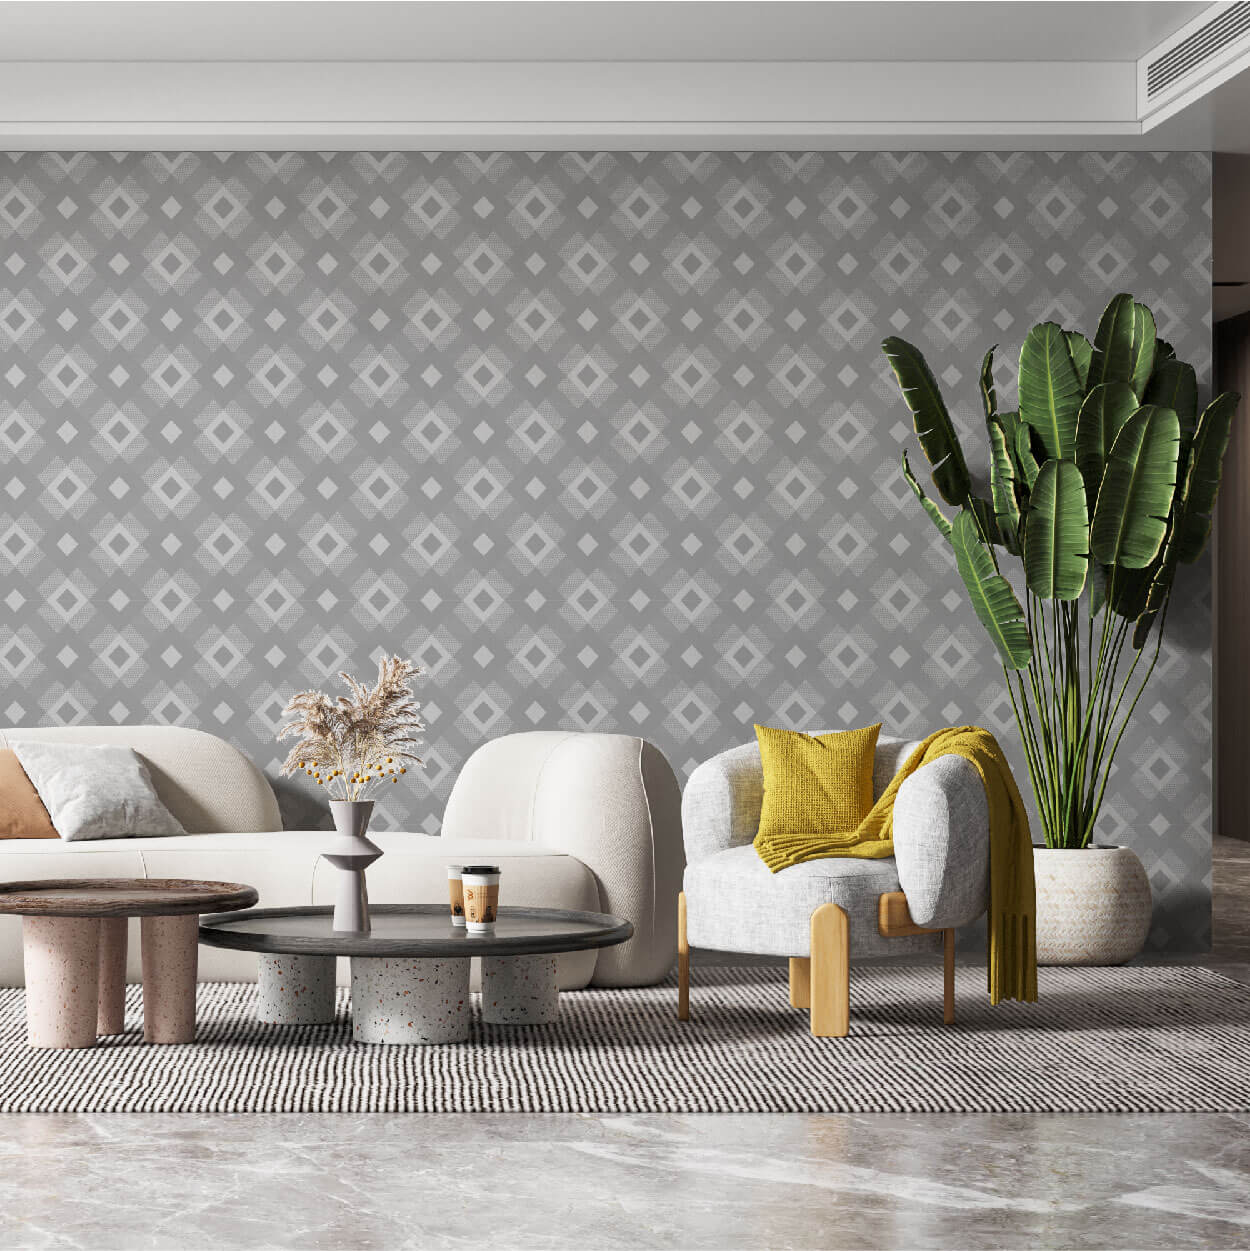 Livingroom with cream furniture with yellow accents and checker square print grey and white diamond pattern wallpaper